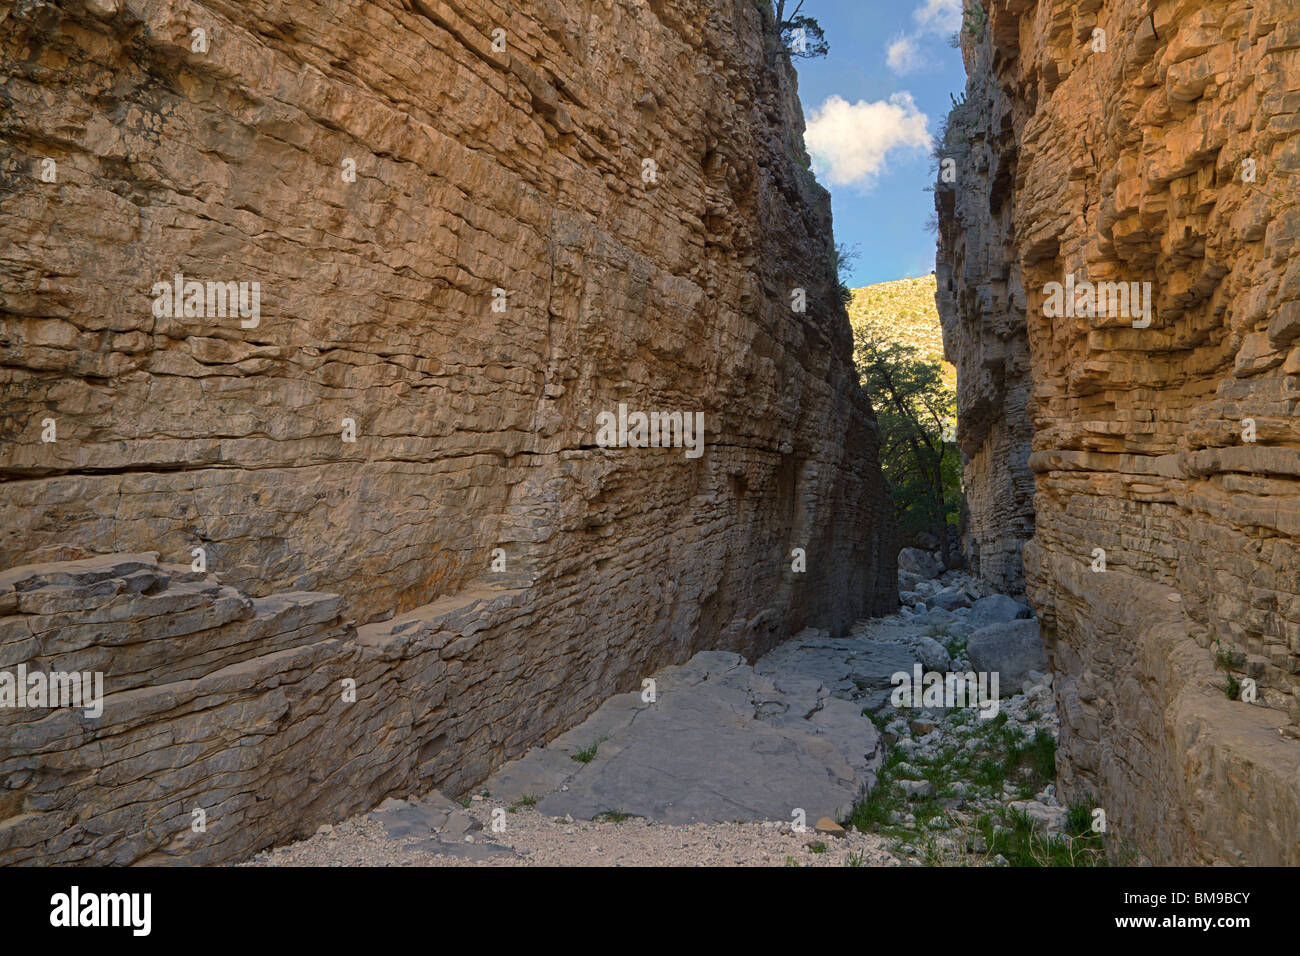 Devil's Hall, Pine Spring Canyon, Guadalupe Mountains National Park, Texas Stock Photo